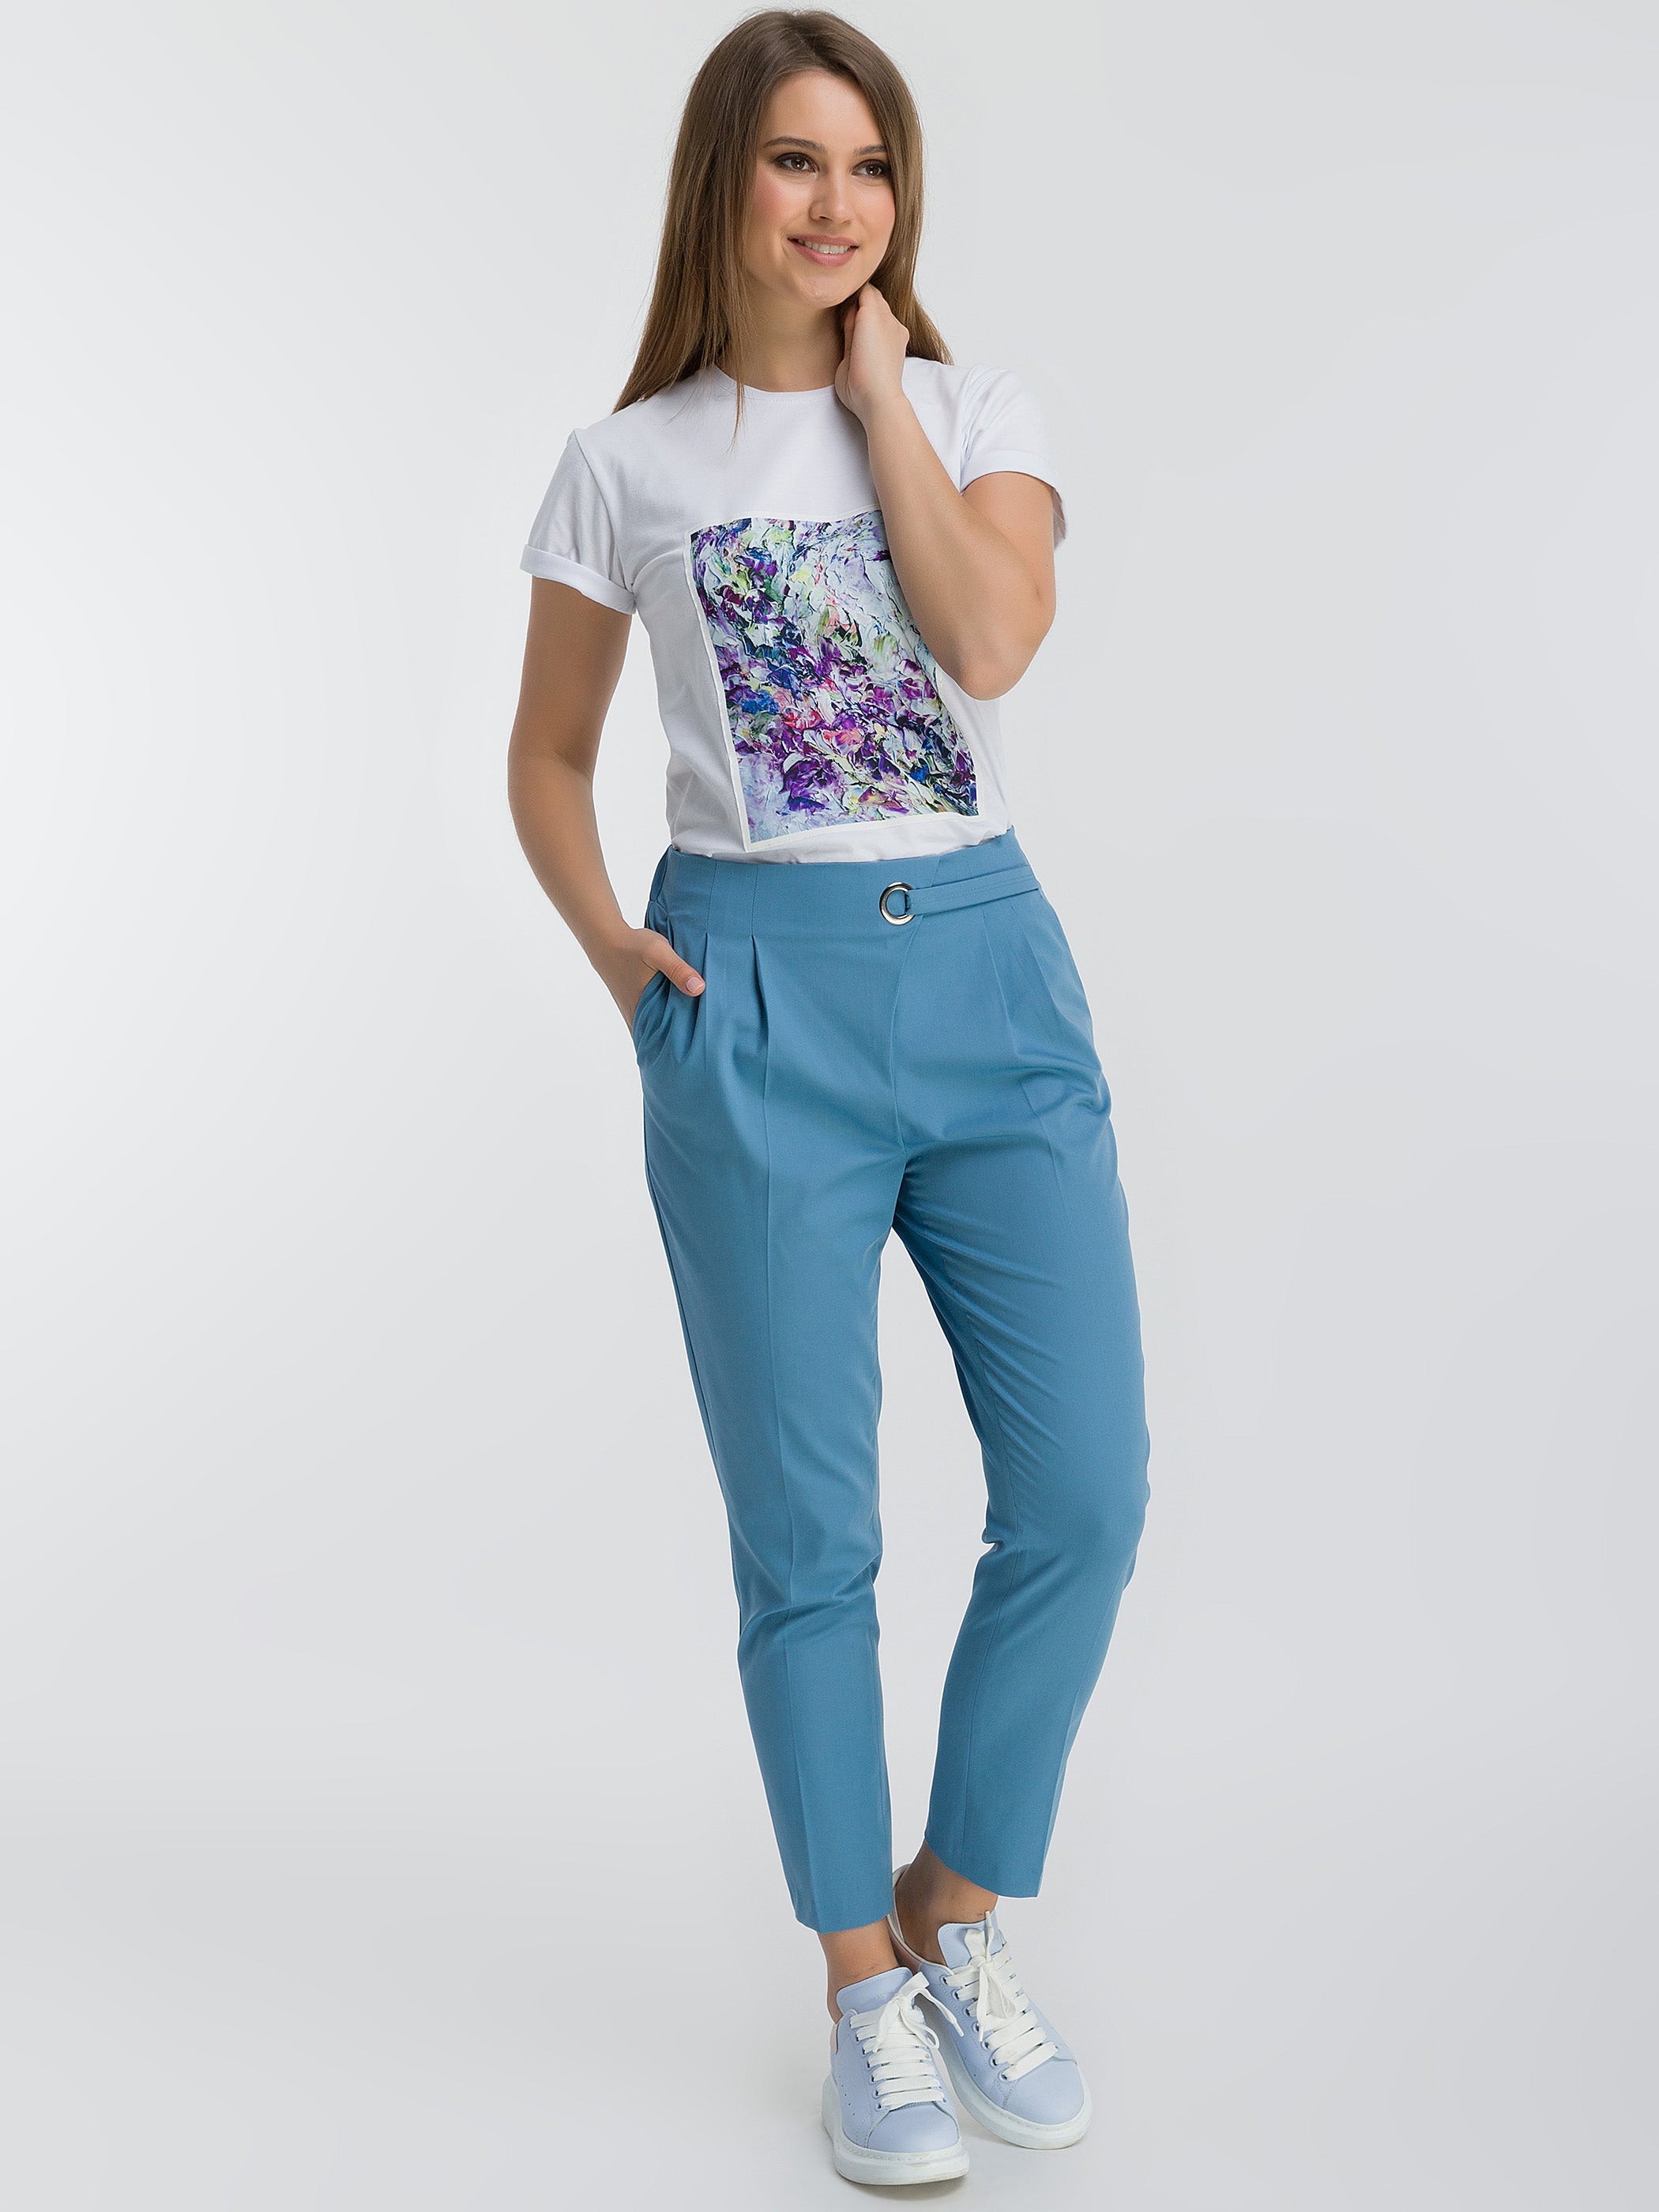 Flowers T-Shirt by AG Sisters